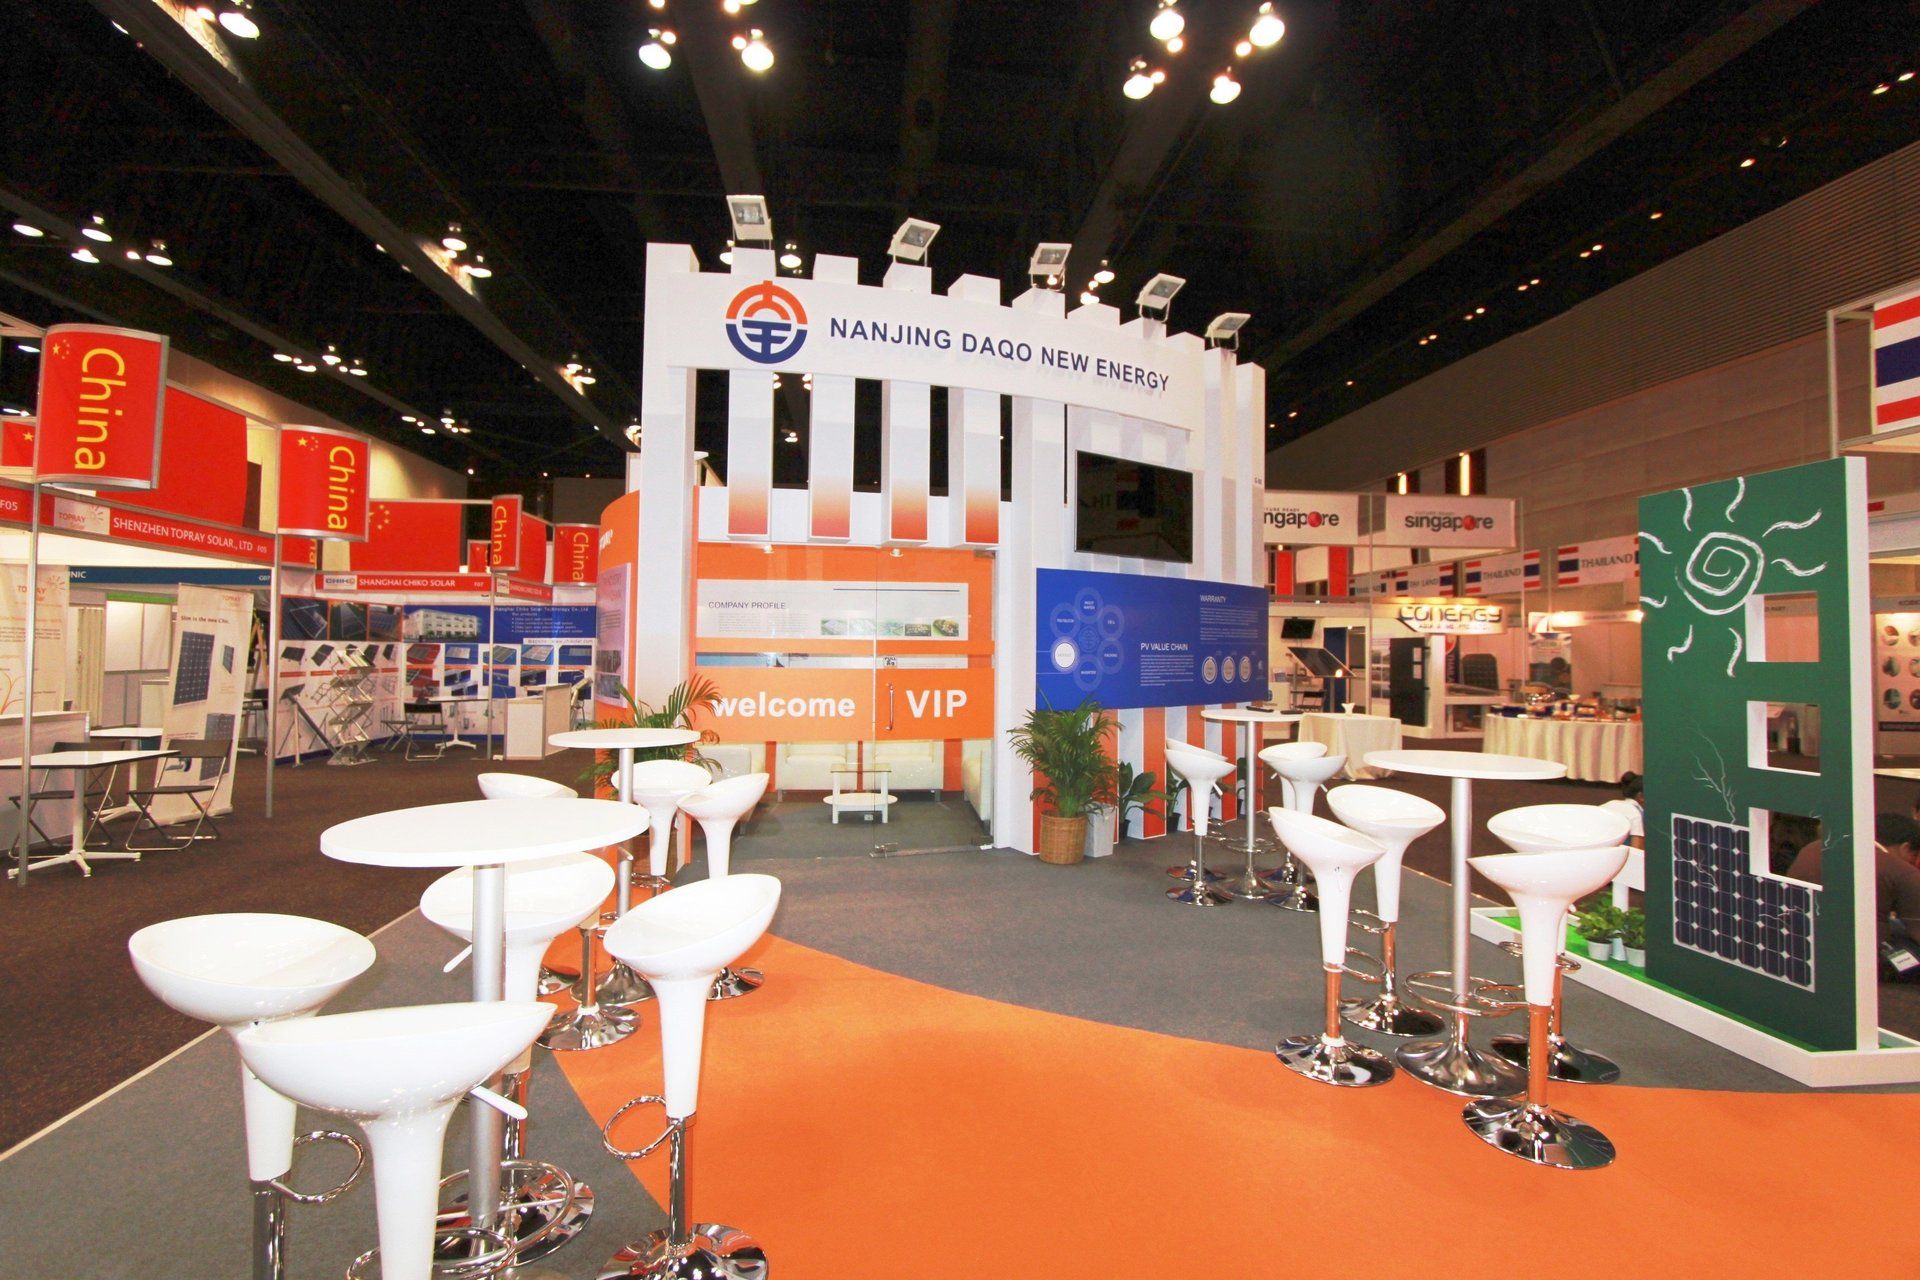 DAQO New Energy Corp @ Carbon Forum Asia 2013. Booth designed and built by Essential Global Fairs.